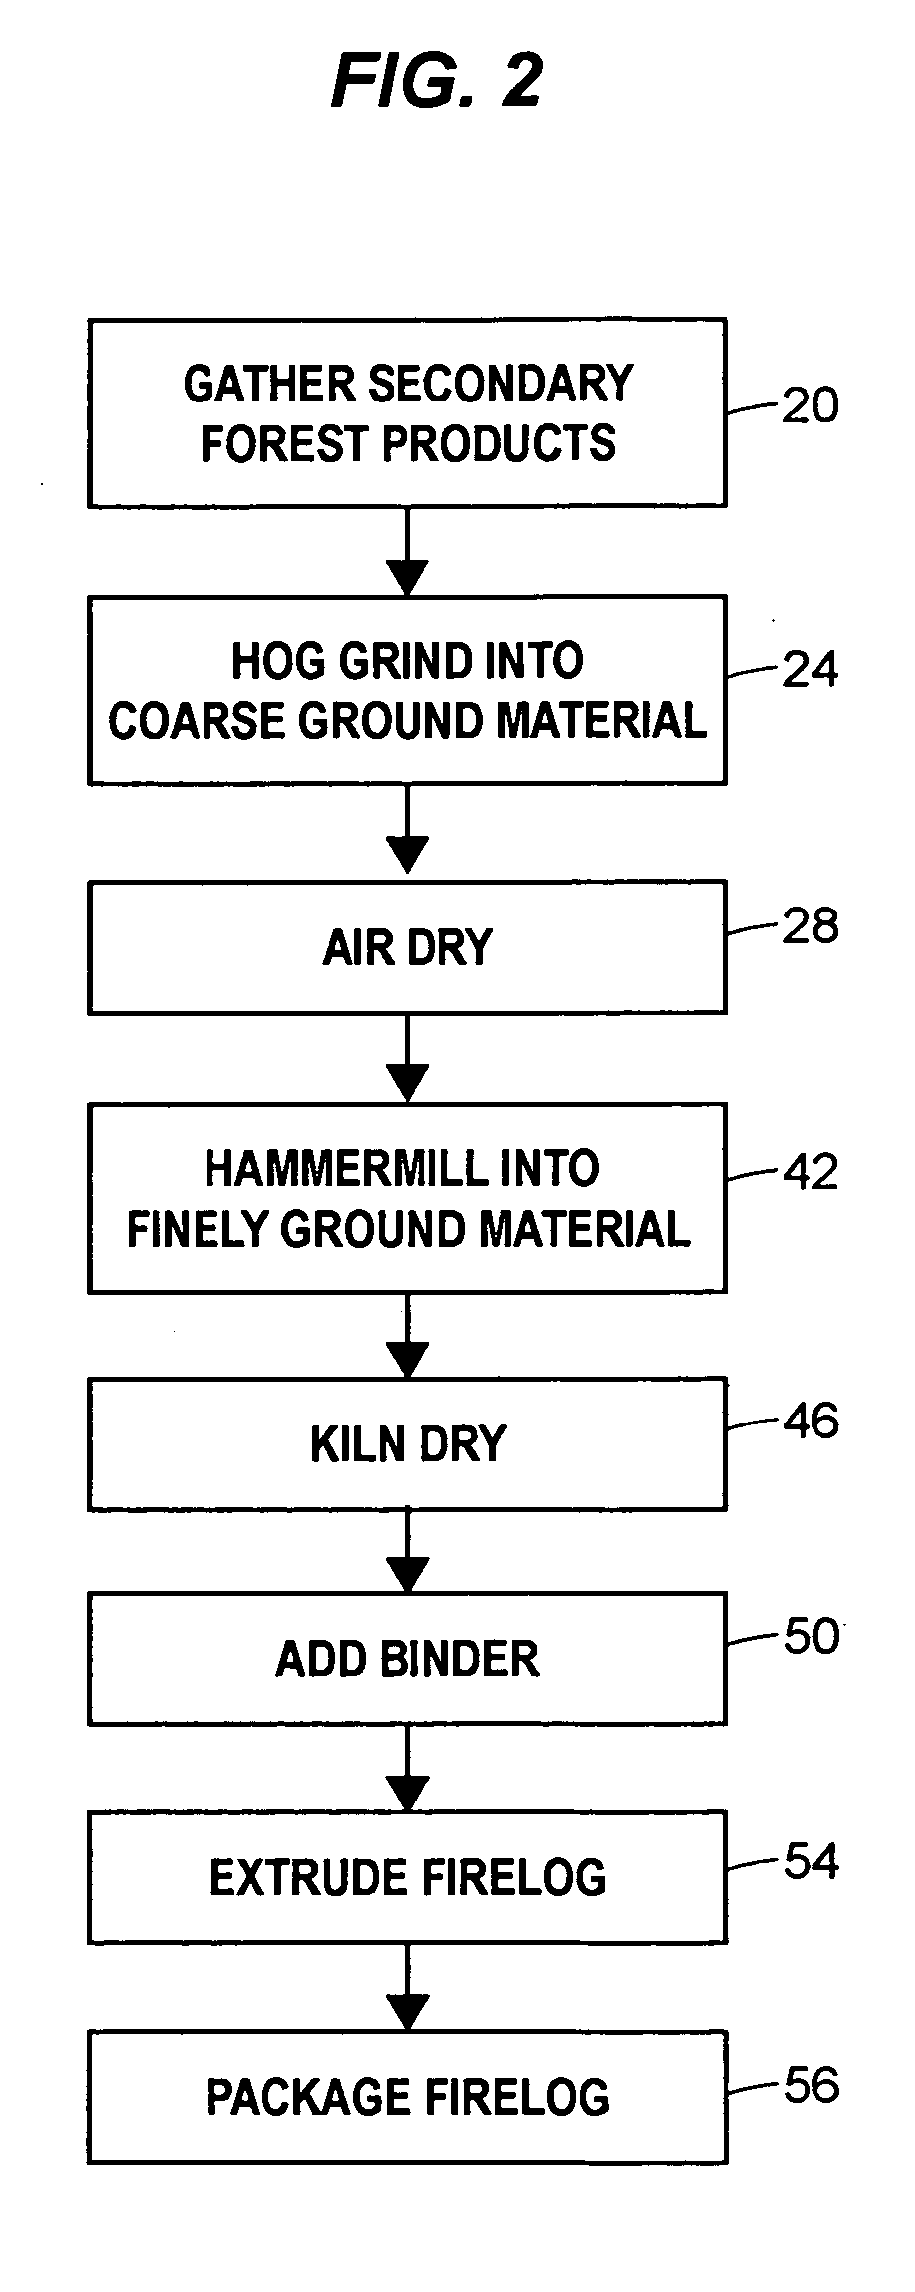 Method of manufacturing densified firelog from unwanted and diseased wood, and method of doing business regarding same